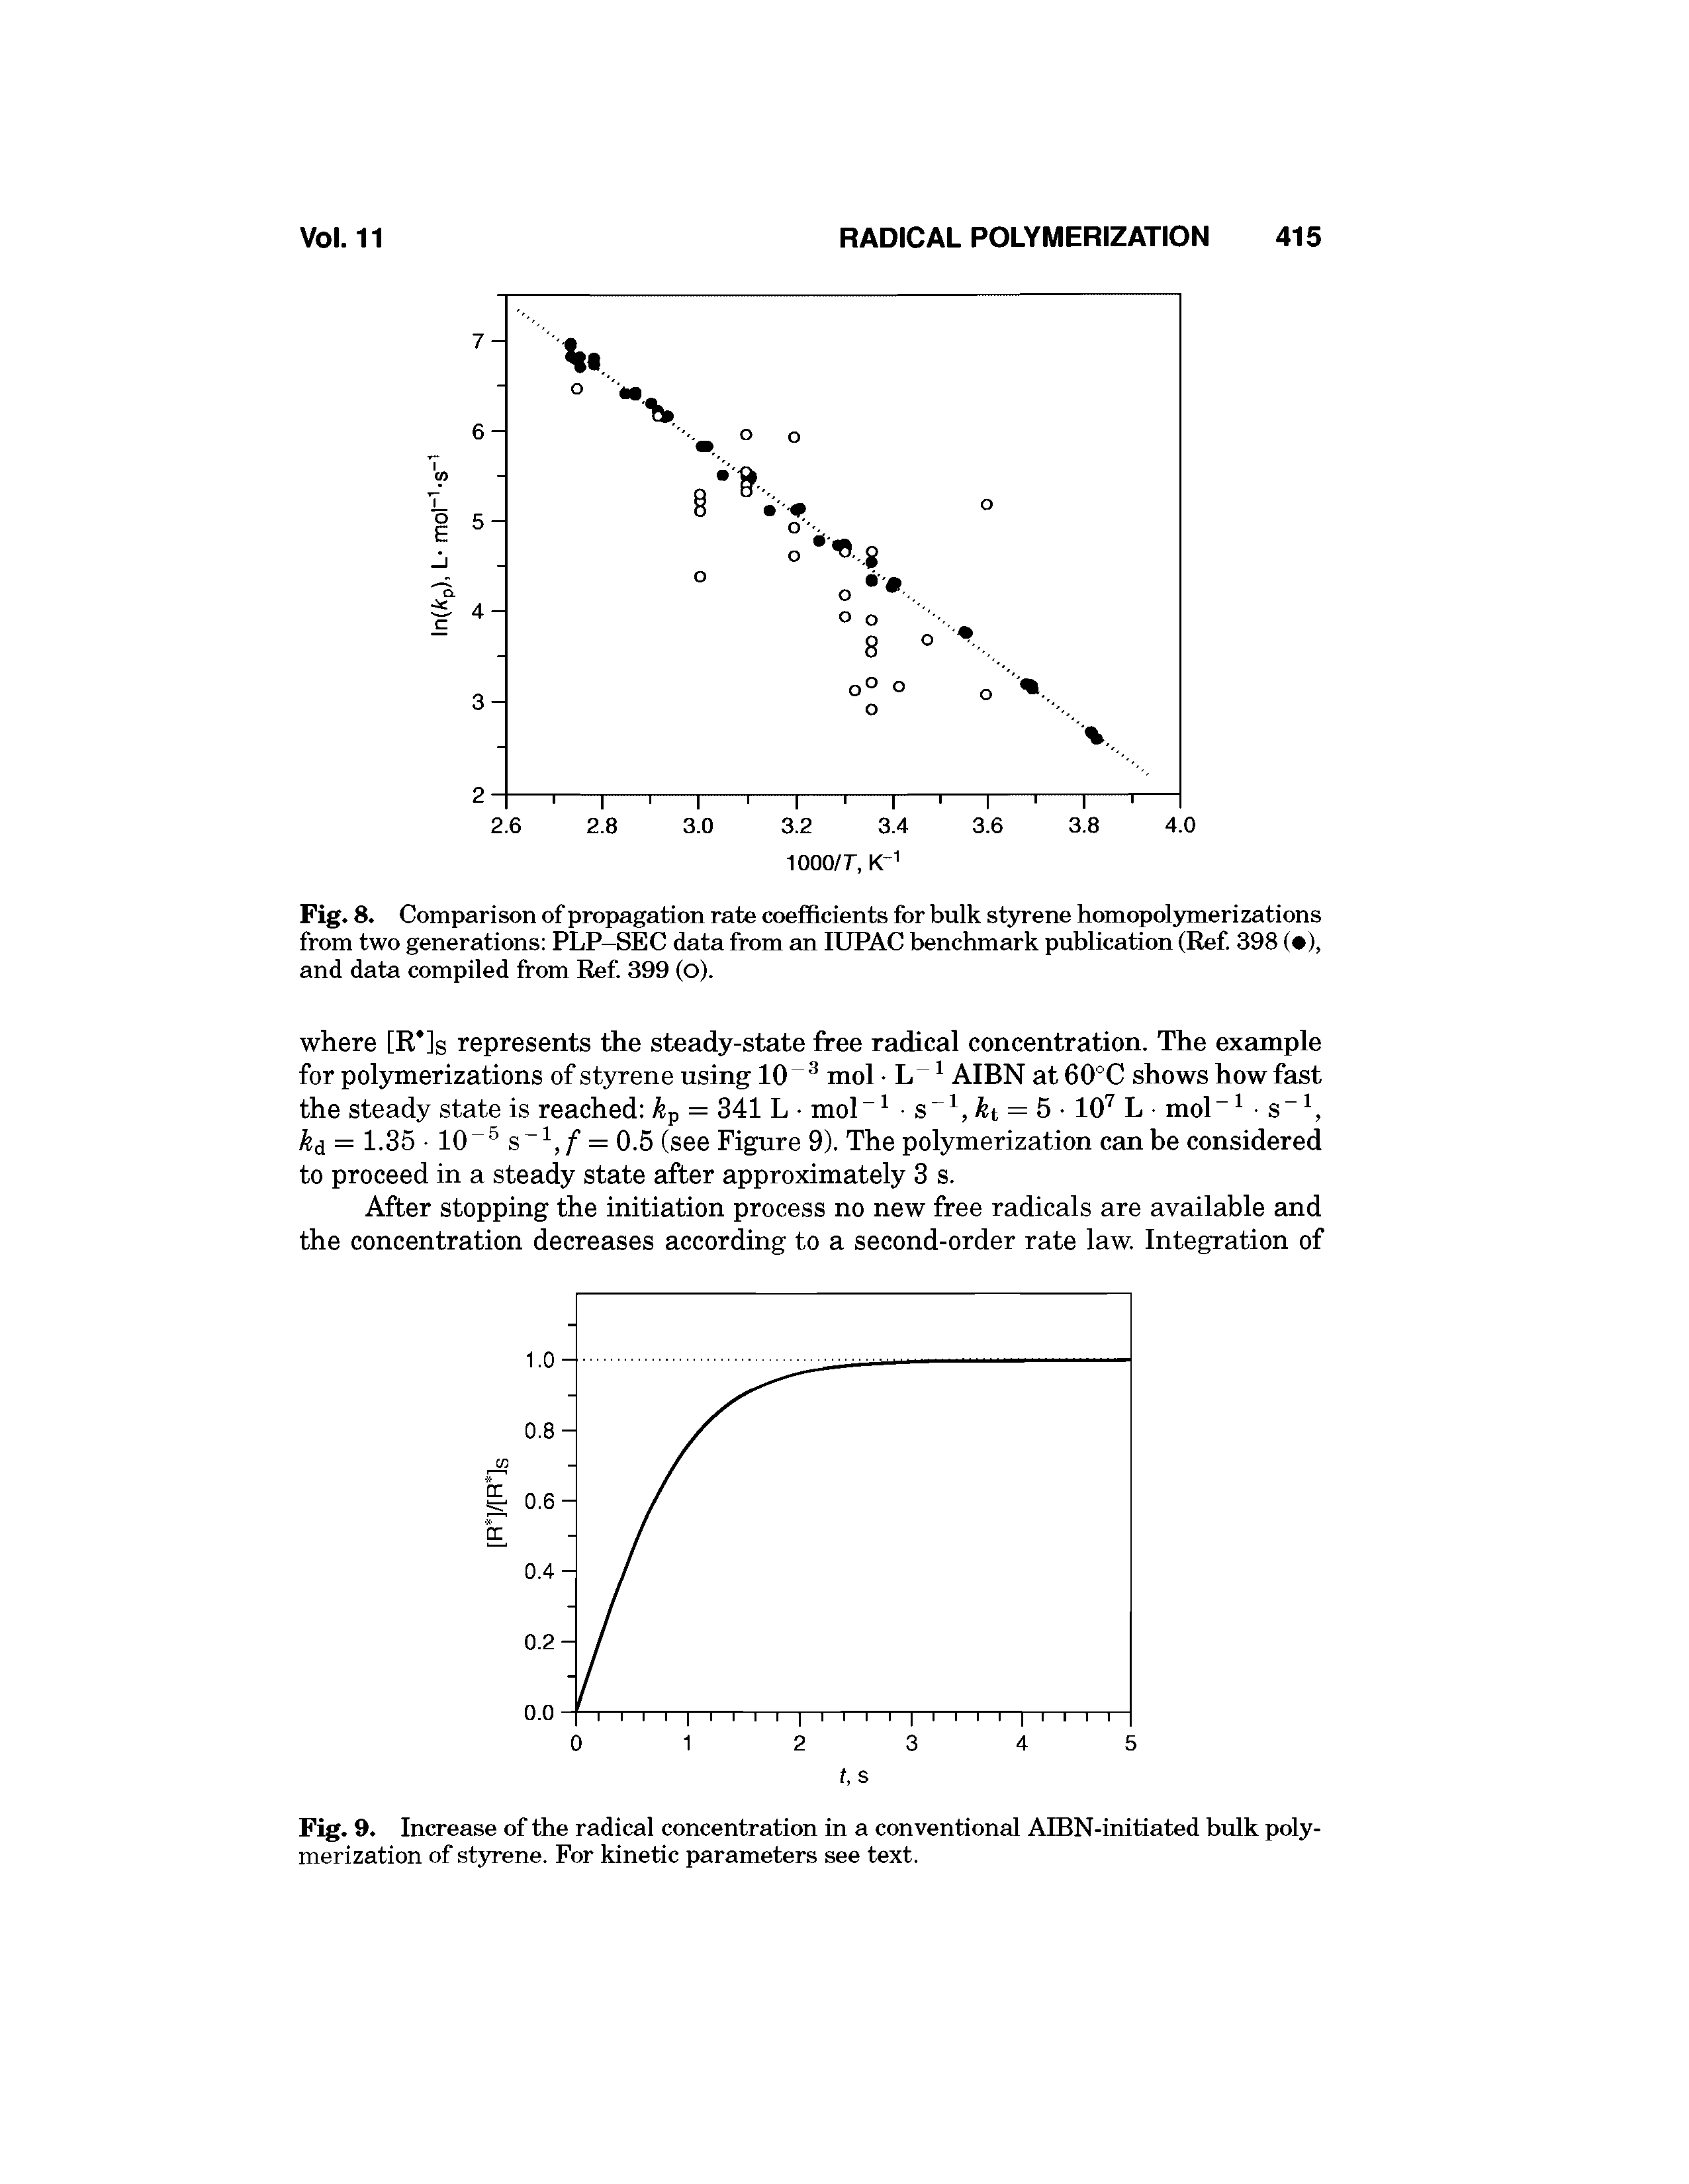 Fig. 9. Increase of the radical concentration in a conventional AIBN-initiated bulk polymerization of styrene. For kinetic parameters see text.